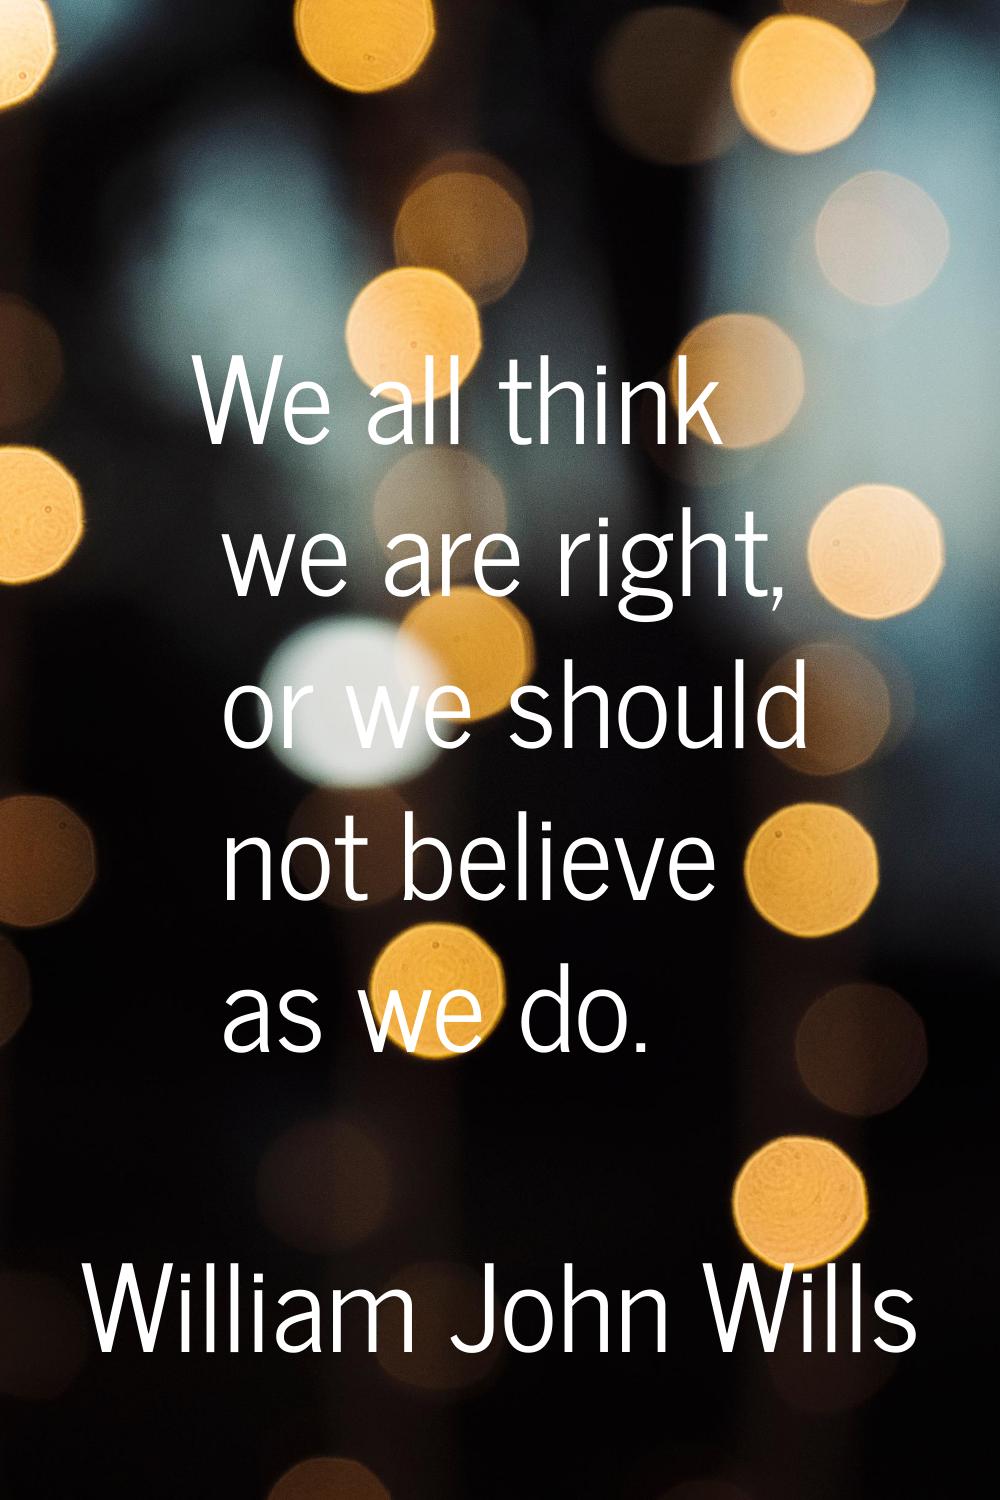 We all think we are right, or we should not believe as we do.